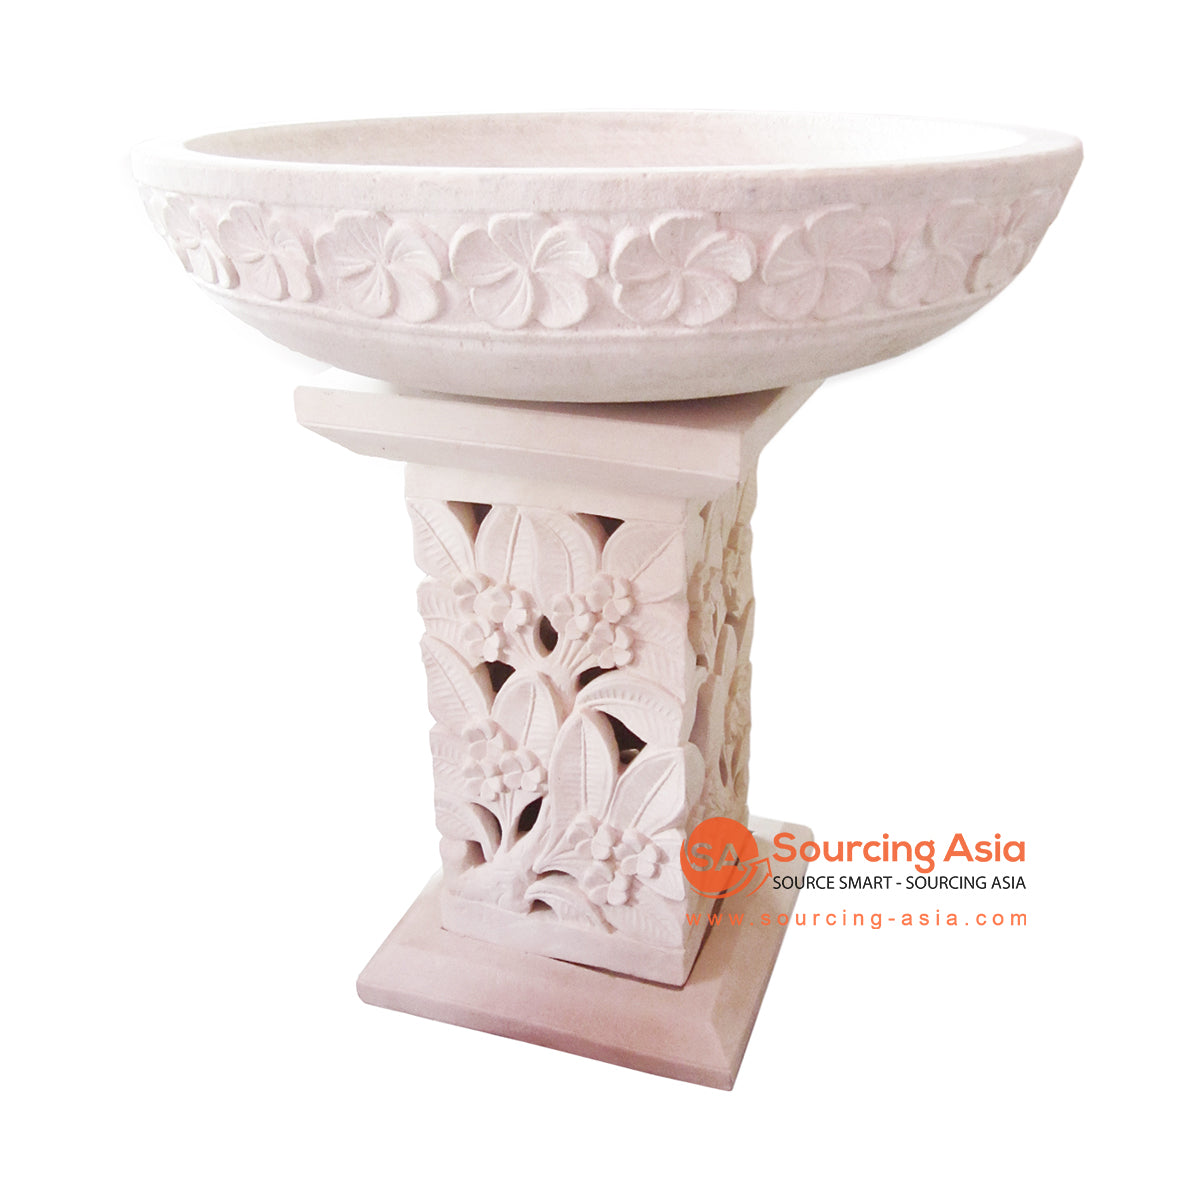 MHB145A STONE FRANGIPANI CARVED BASIN WITH CARVED CULVERT STAND